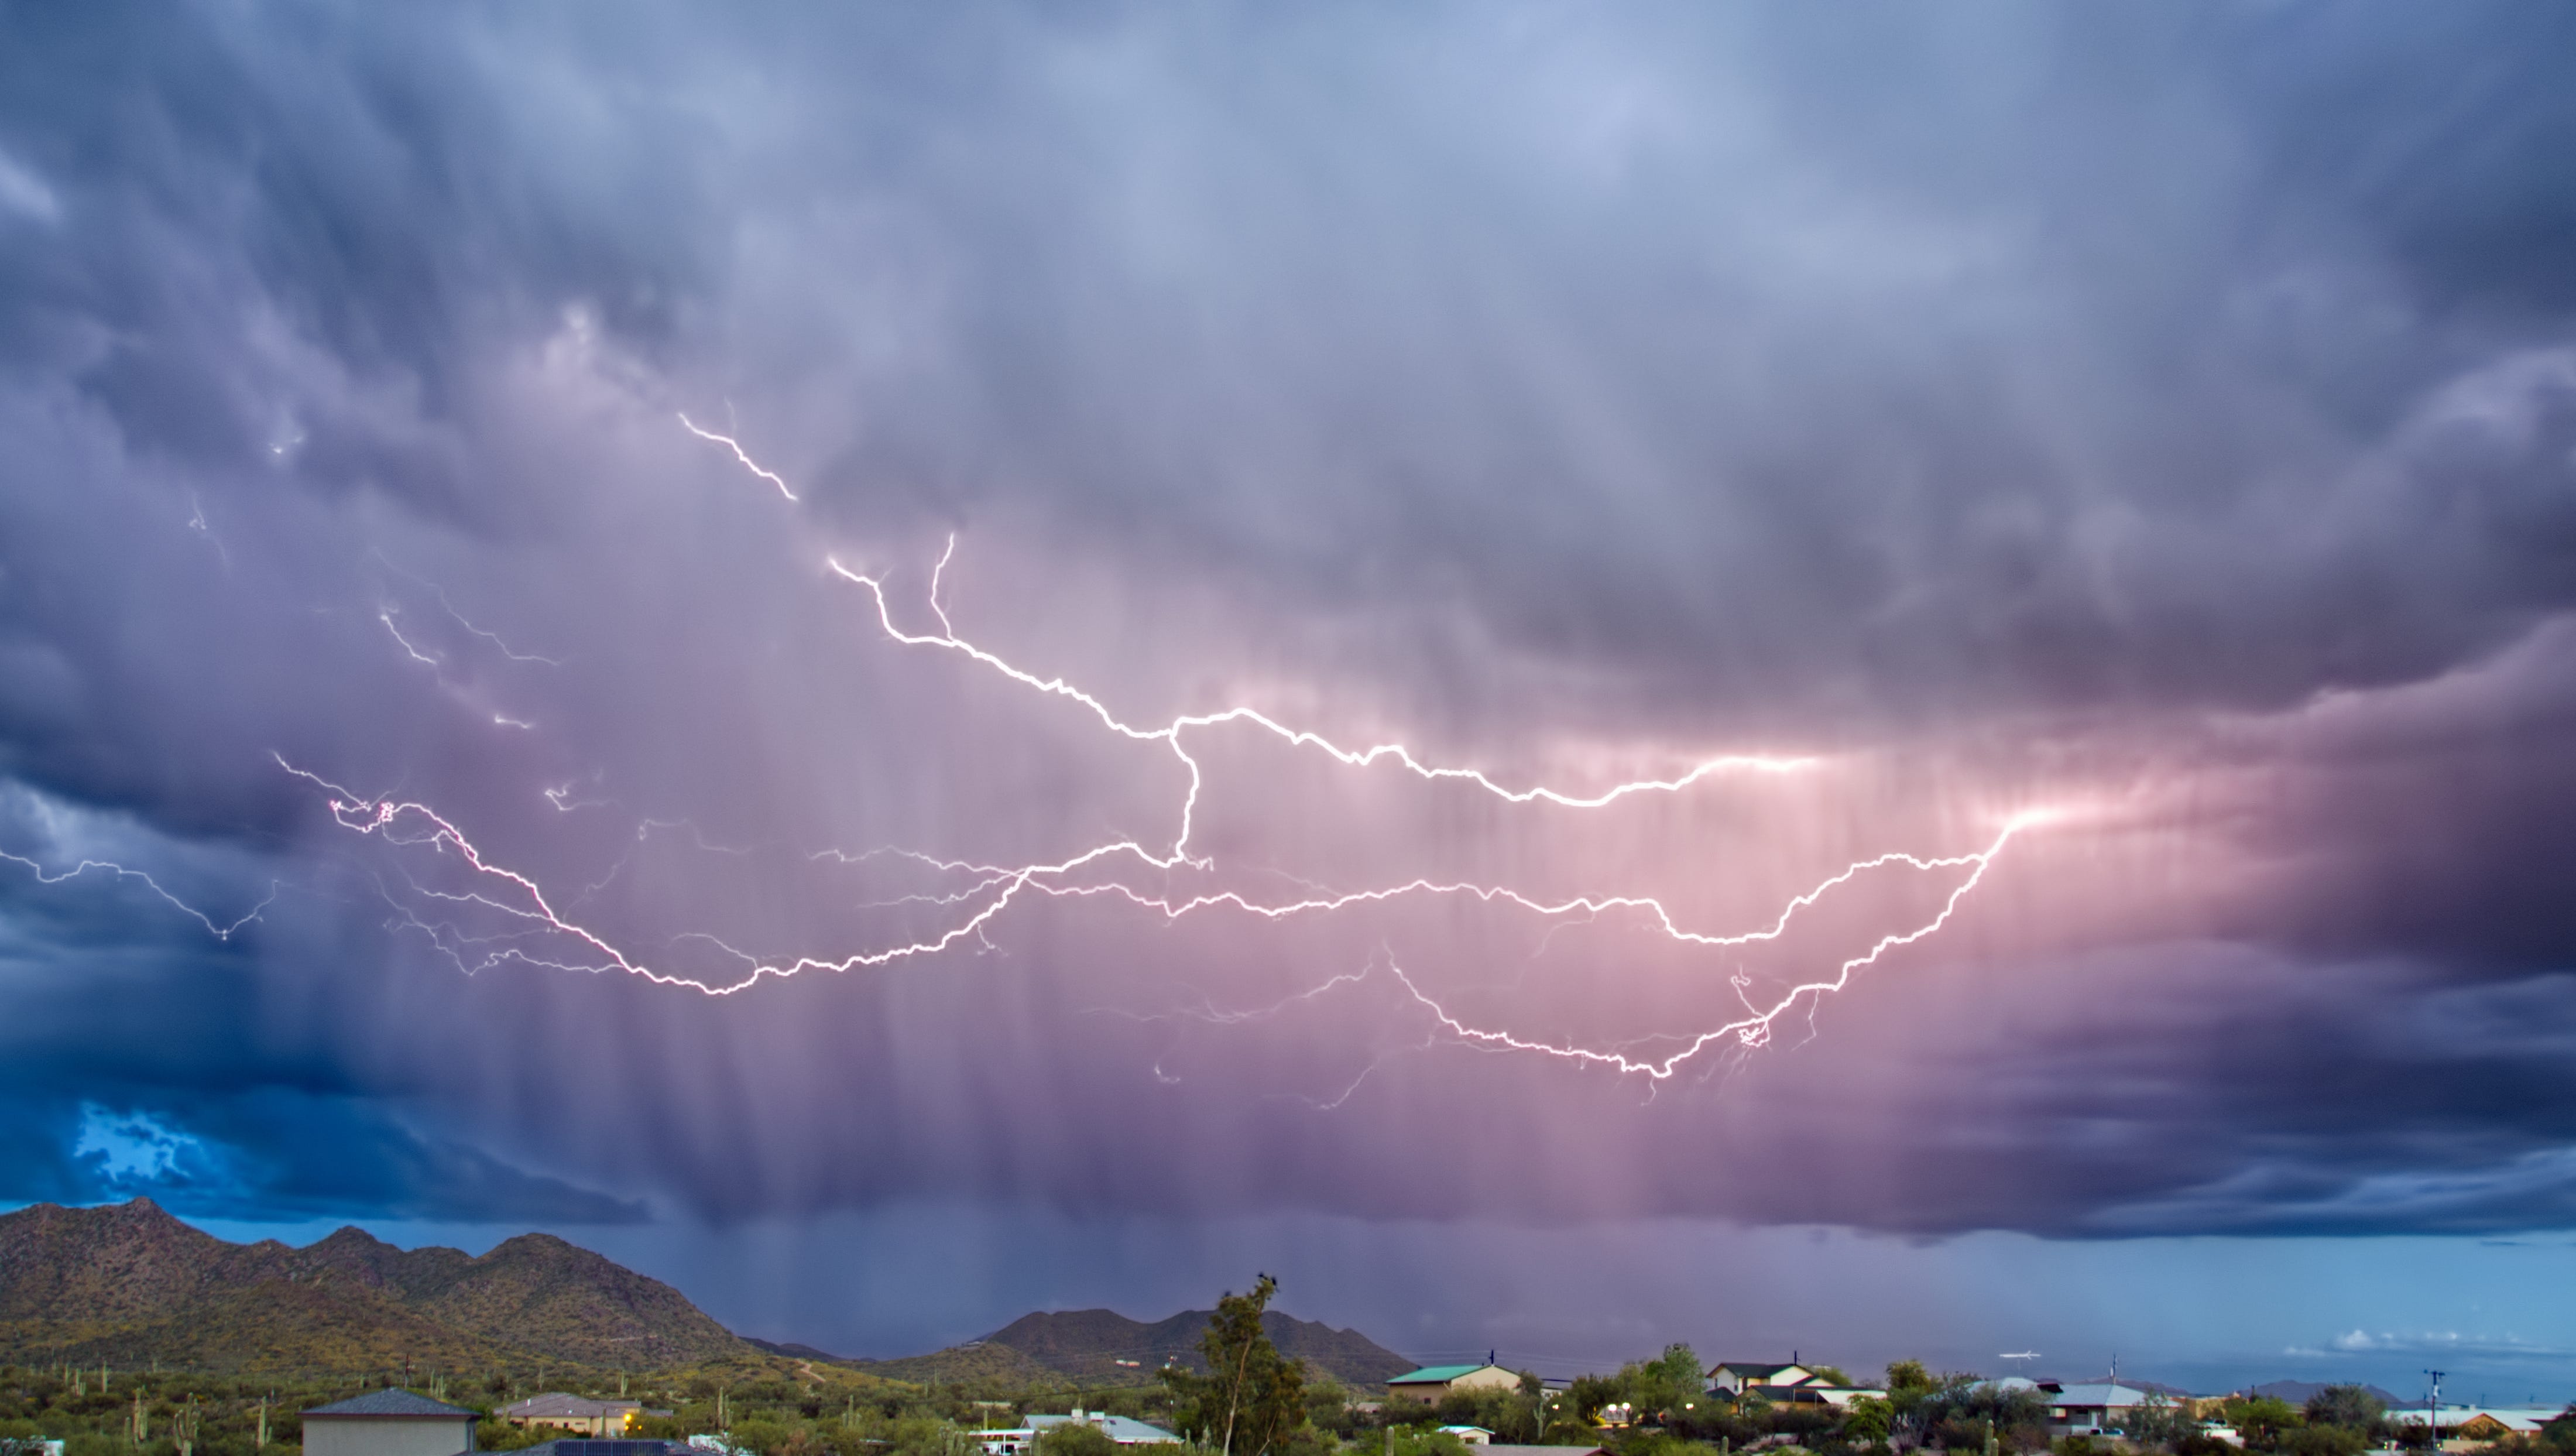 Hiking during monsoon season? These lightning tips could save your life